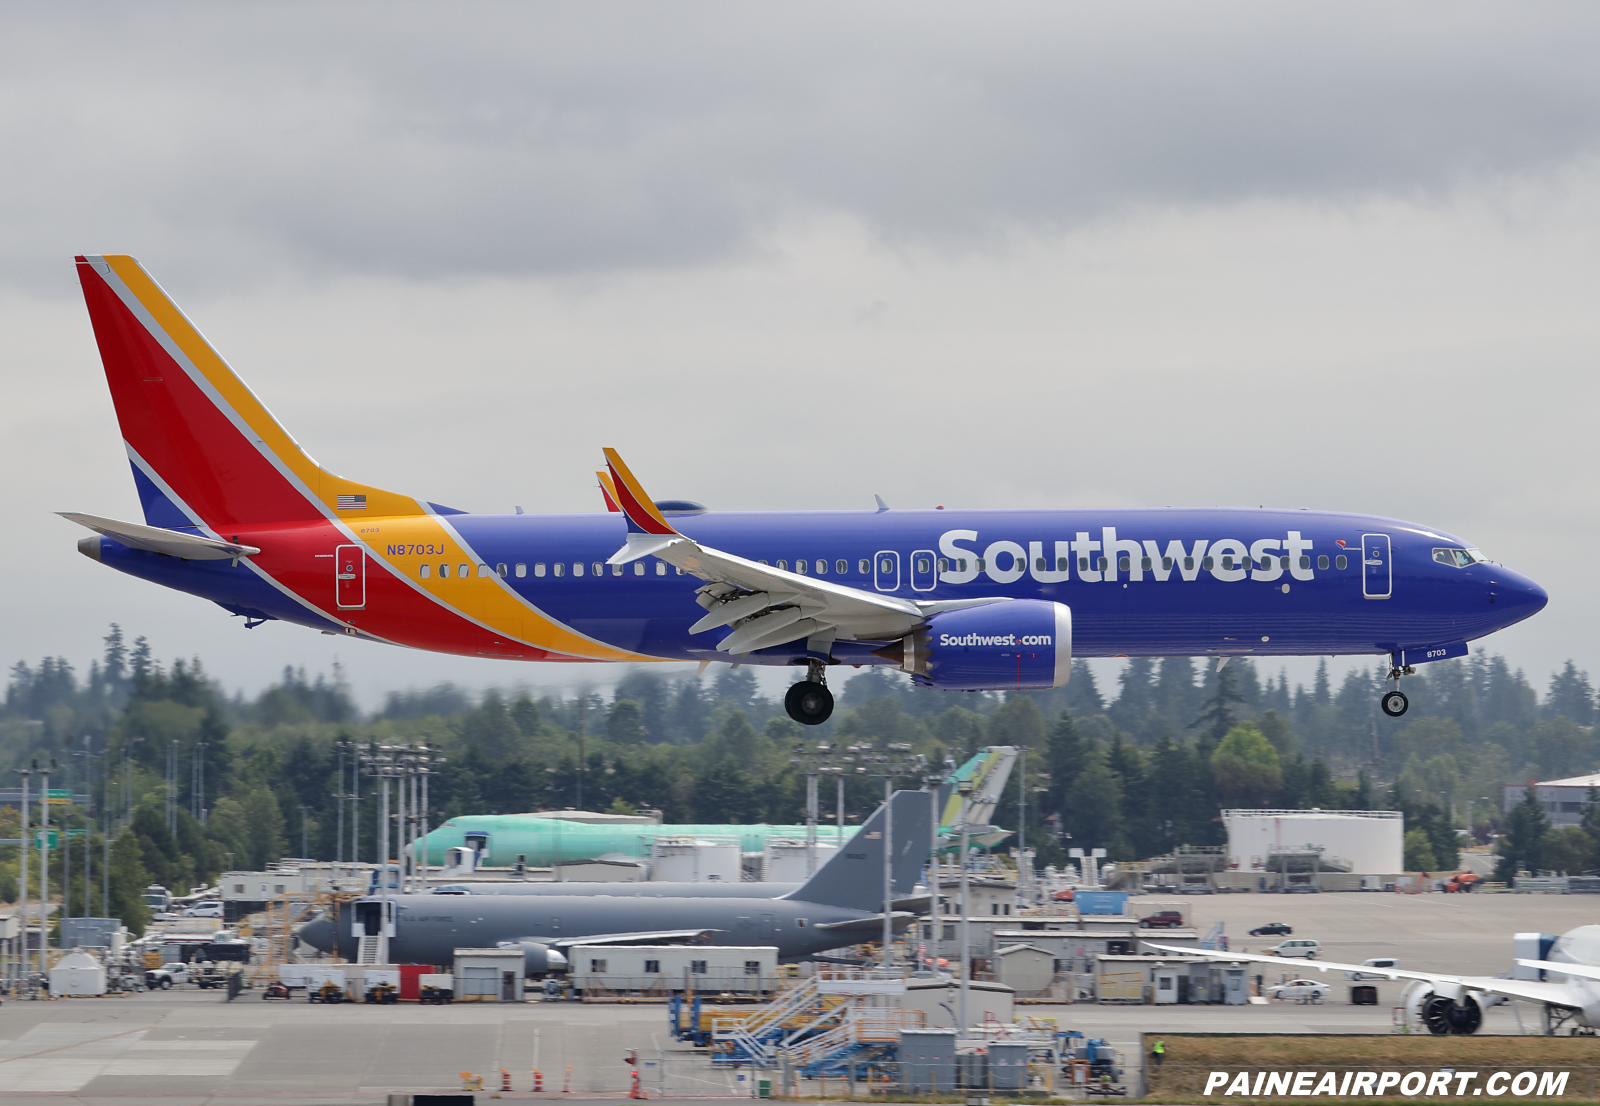 Southwest Airlines 737 N8703J at KPAE Paine Field